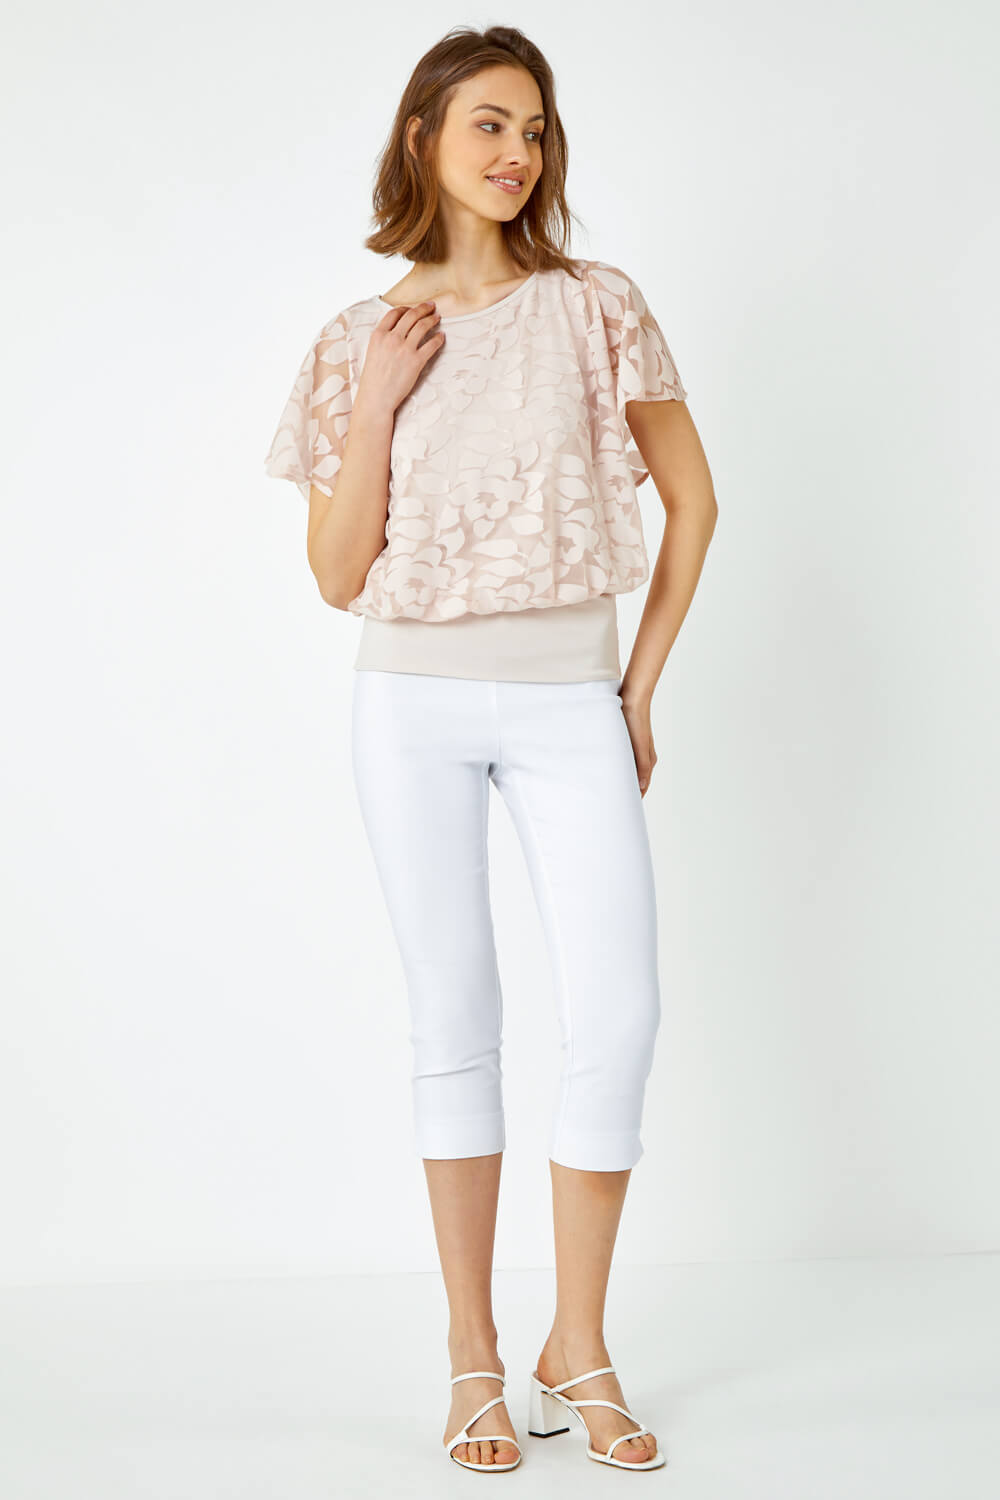 Stone Textured Floral Blouson Stretch Top, Image 2 of 5